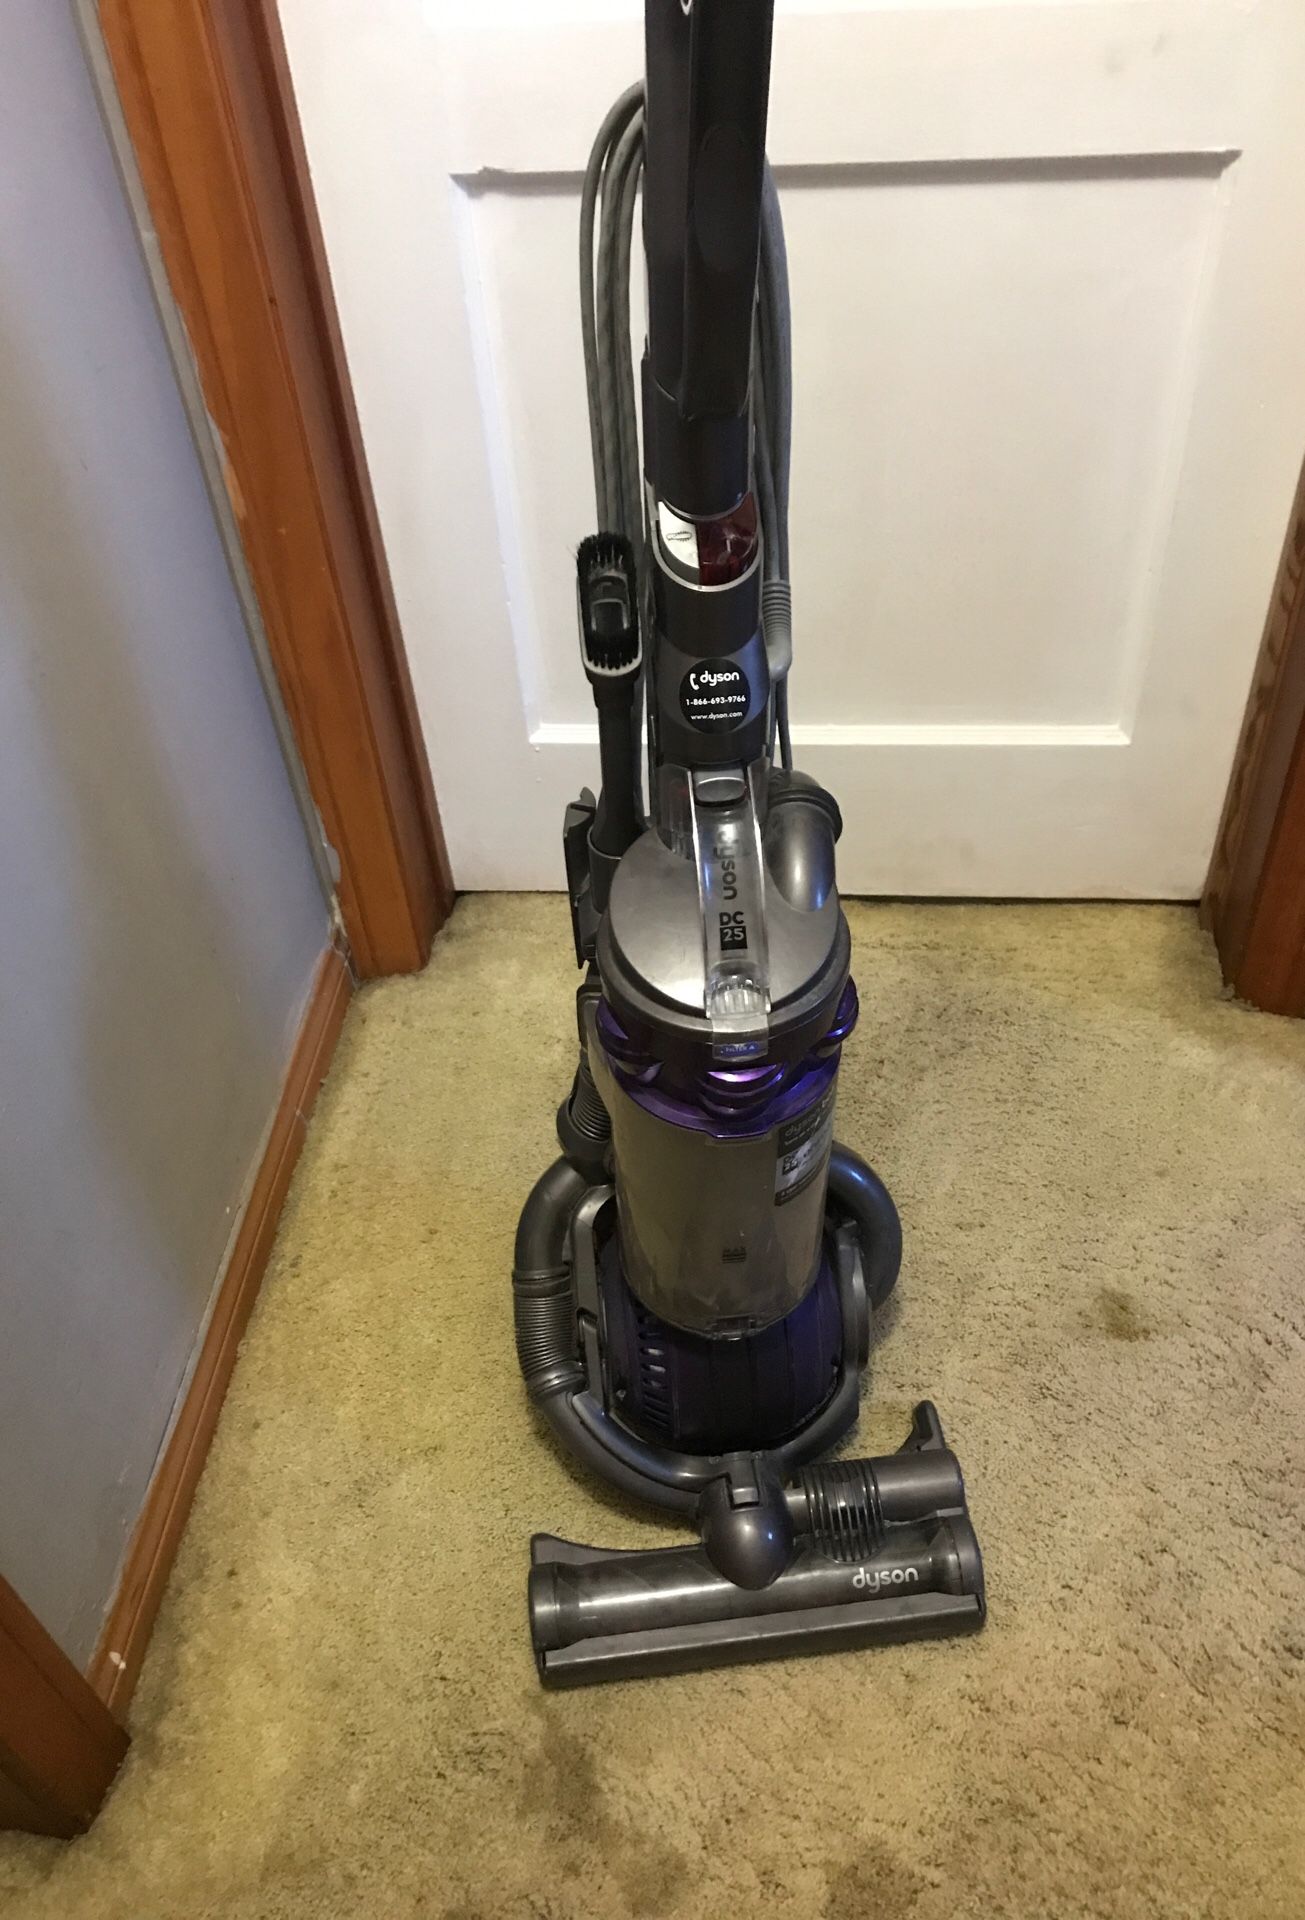 DYSON 25 multi surface vacuum complete and works excellent